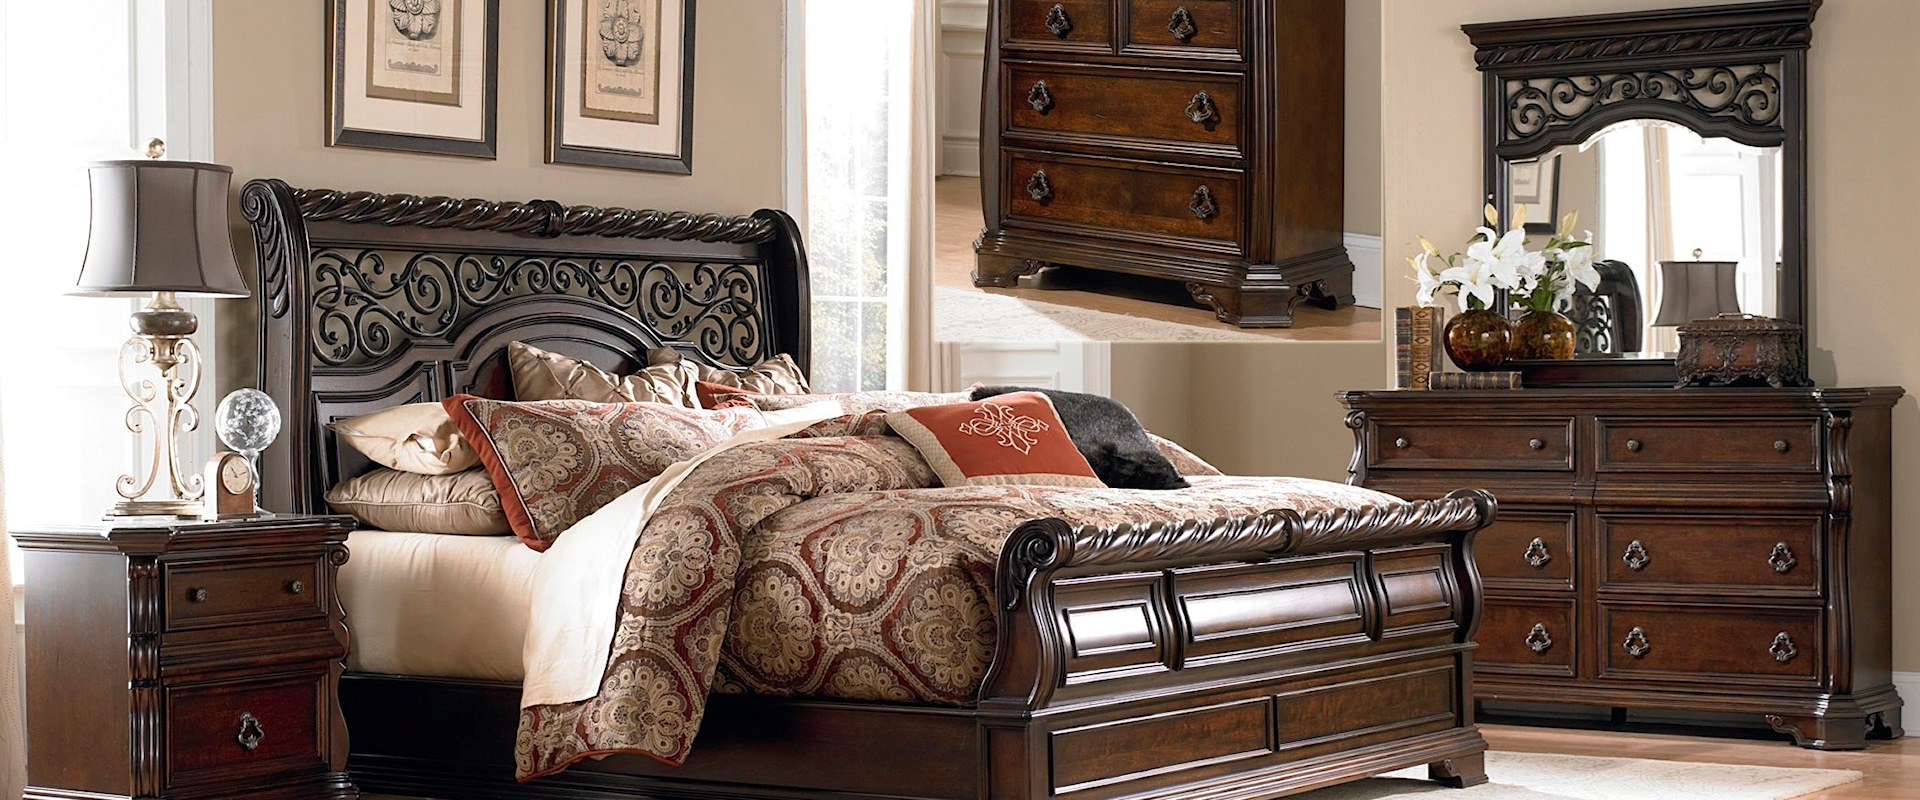 Traditional 5-Piece Queen Bedroom Set with Felt Lined Drawers and Canted Corners